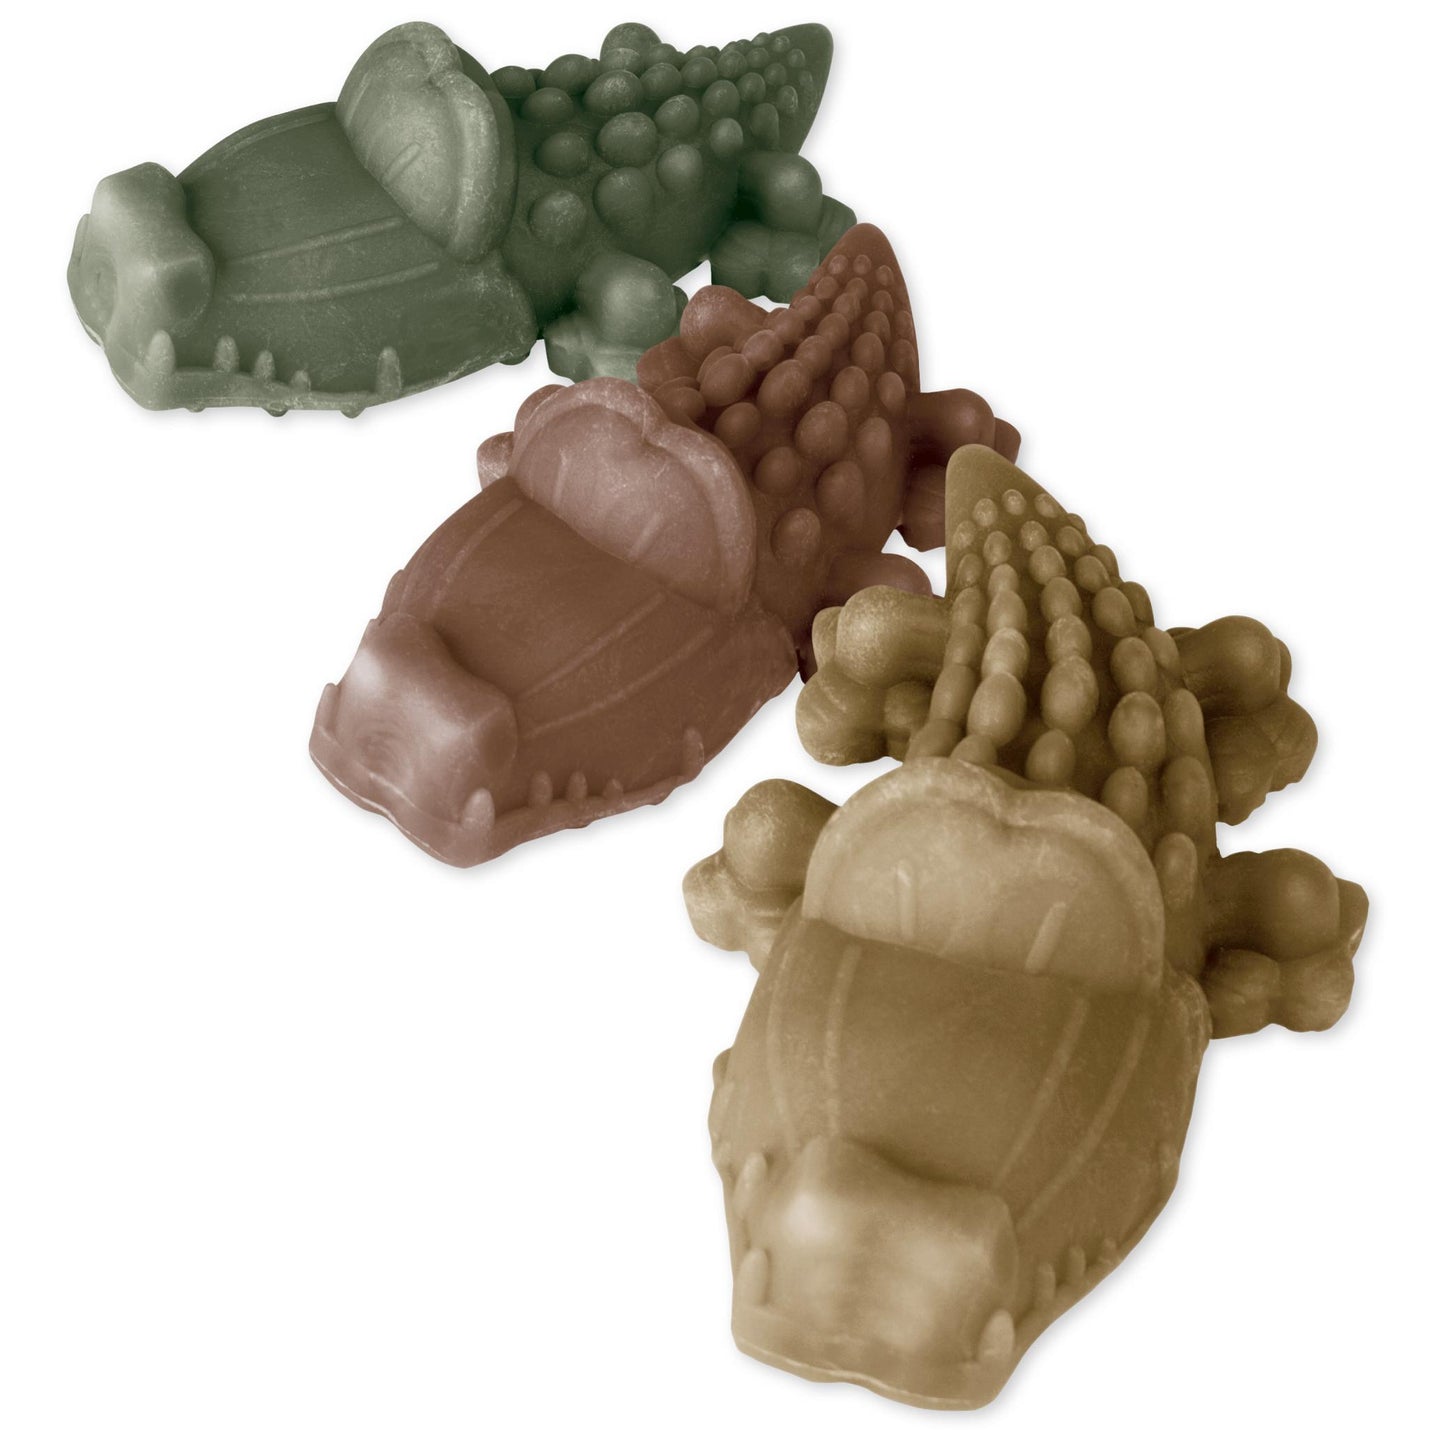 Whimzees Alligator Small 24 Chews